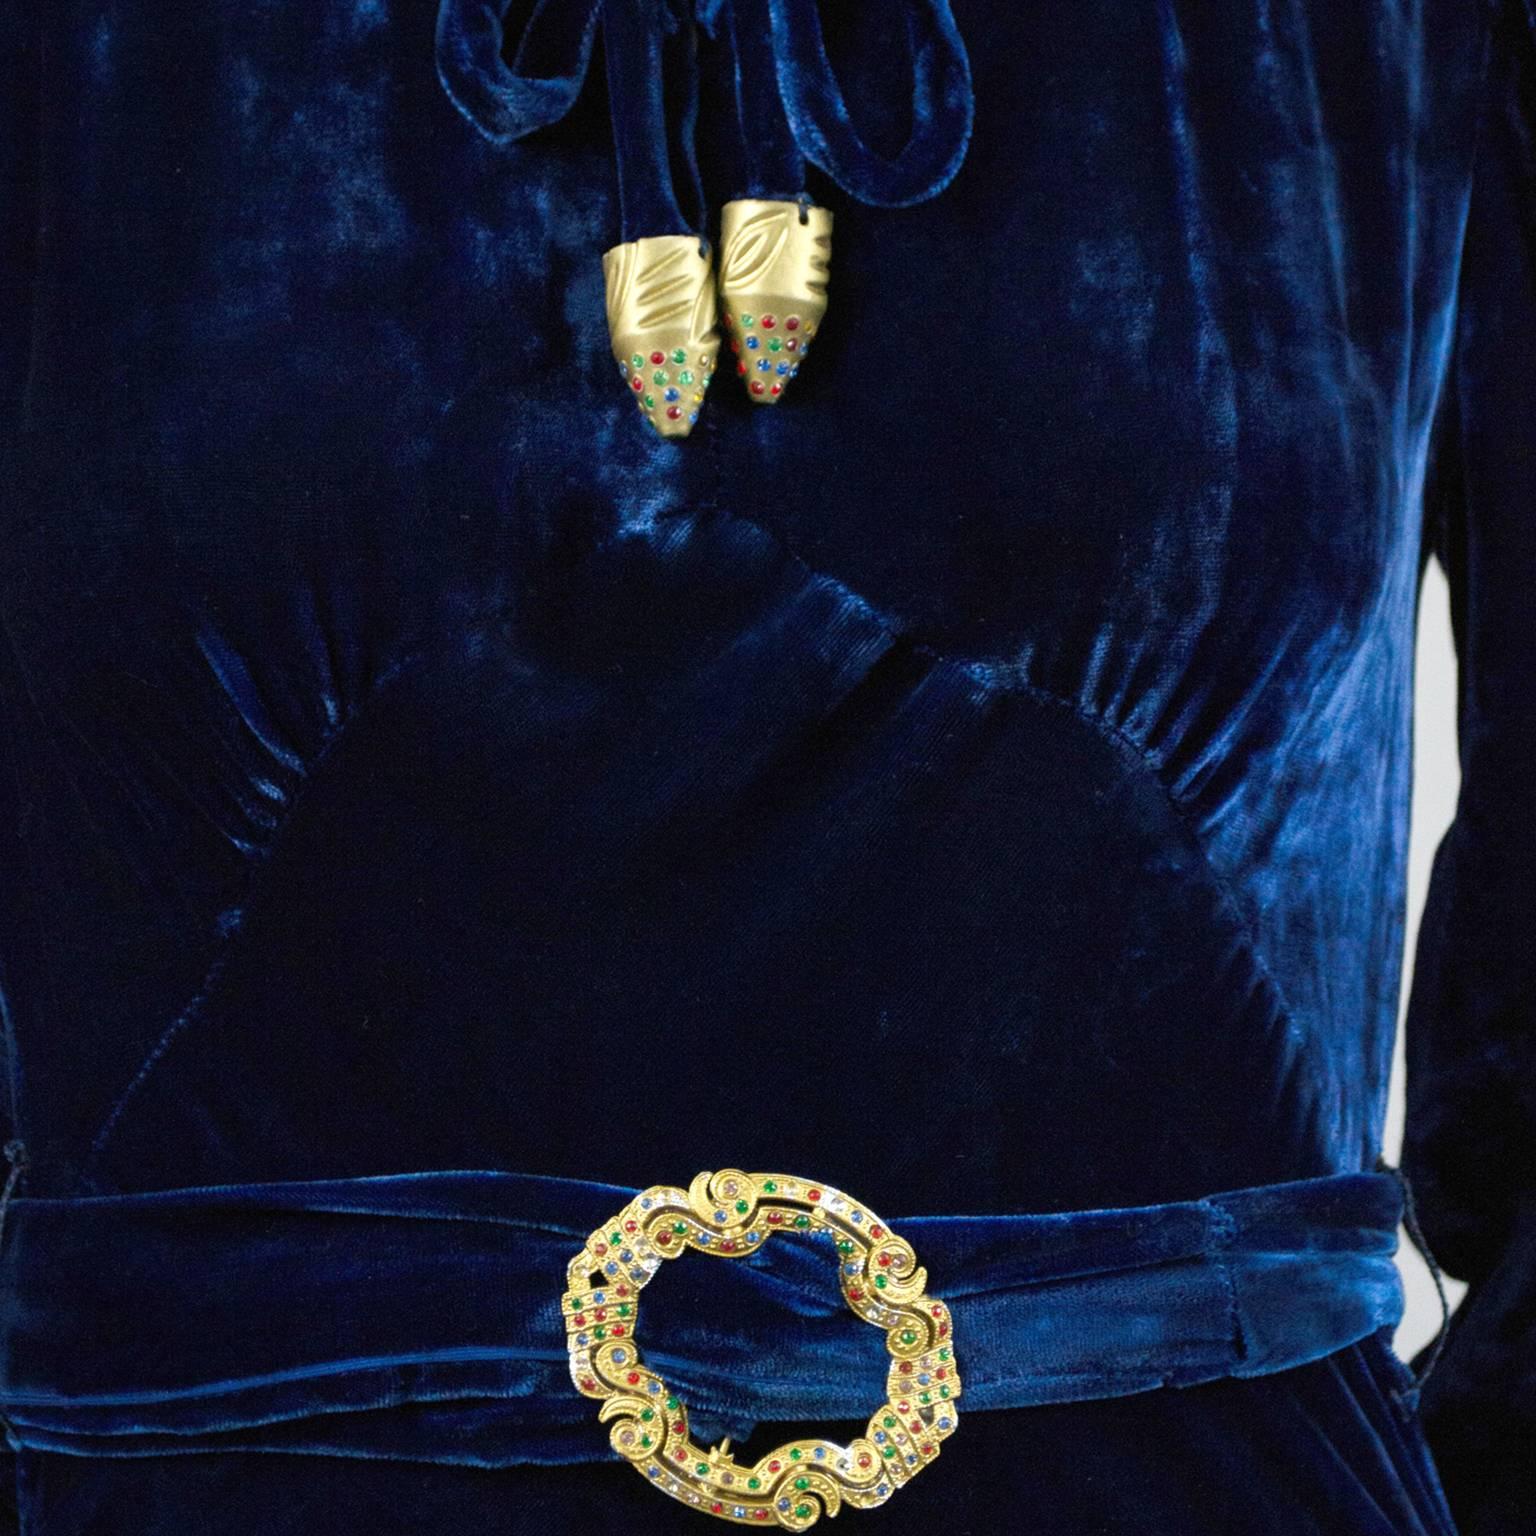 This is a gorgeous blue rayon velvet vintage dress from the 1930's.  The dress has beautiful ties at the neck that have gold metal aglets with multi covered rhinestones. The belt is made in the same luxe blue velvet and the gold buckle has the same